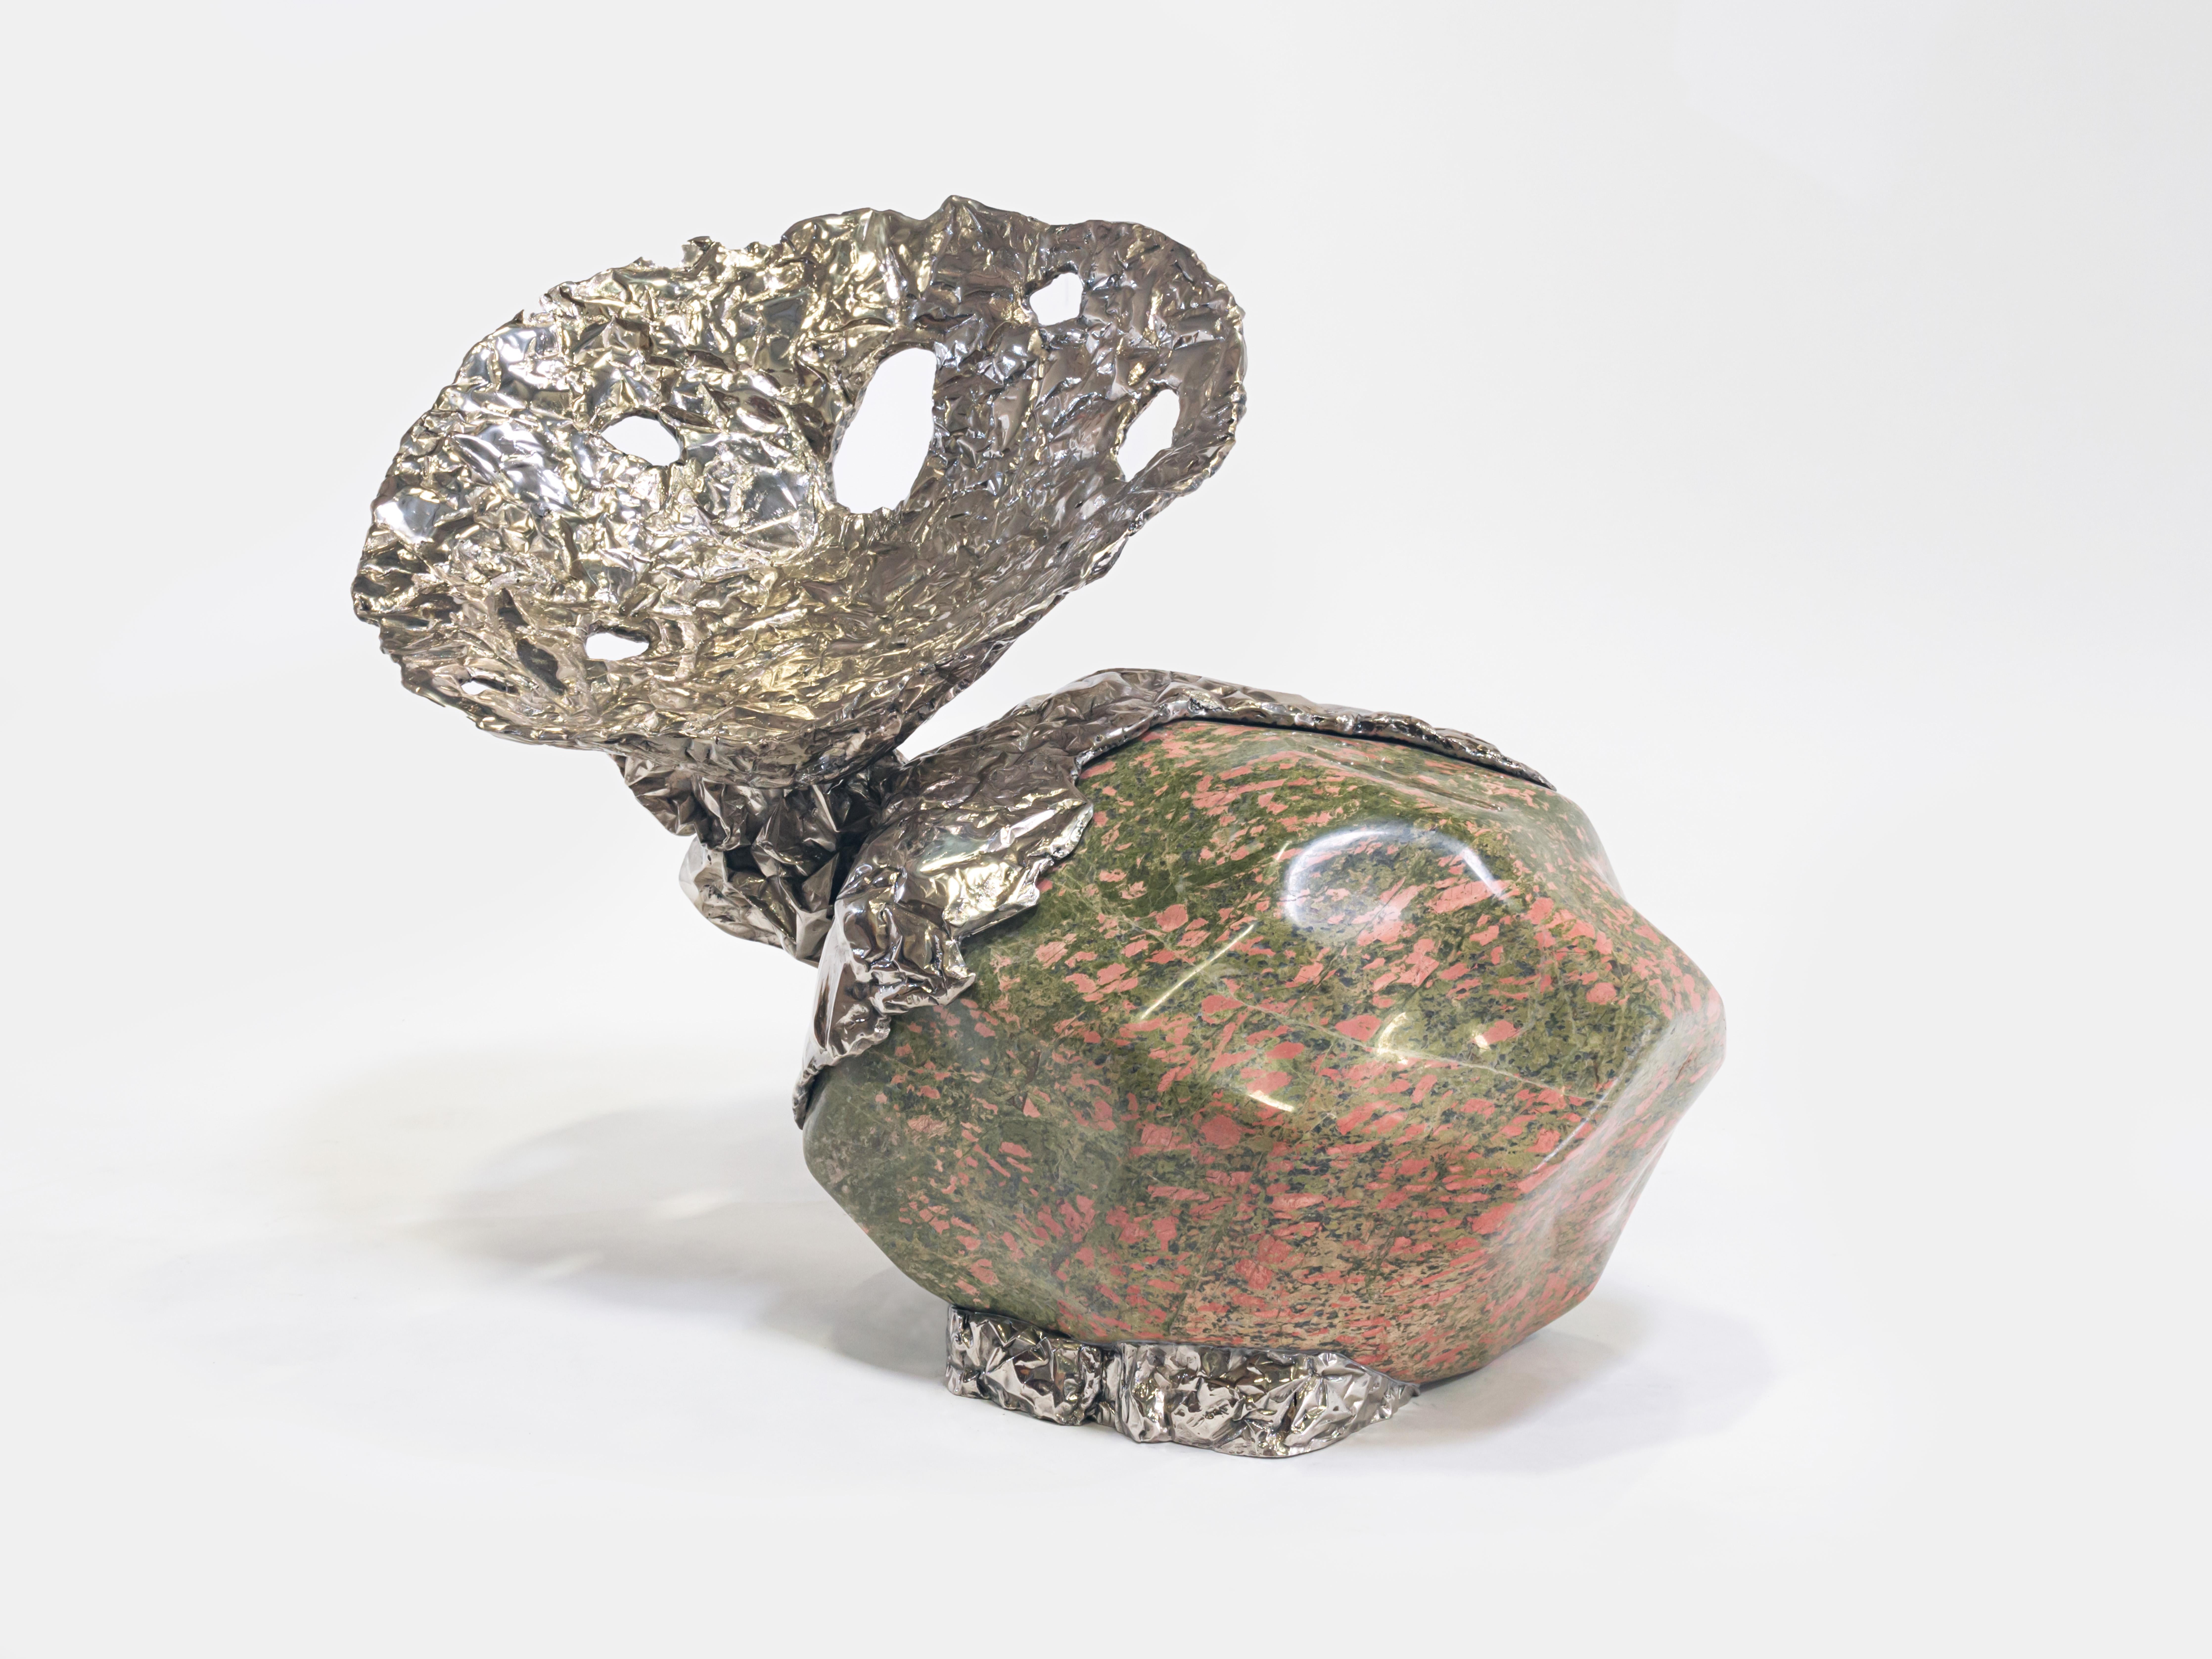 Misha Kahn [American, b. 1989]
Over the Edge, 2019
Unakite, white bronze
Measures: 36 x 48 x 24 inches
91.5 x 122 x 61 cm
This work is unique

Misha Kahn was born in Duluth, Minnesota in 1989. He graduated from the Rhode Island School of Design in